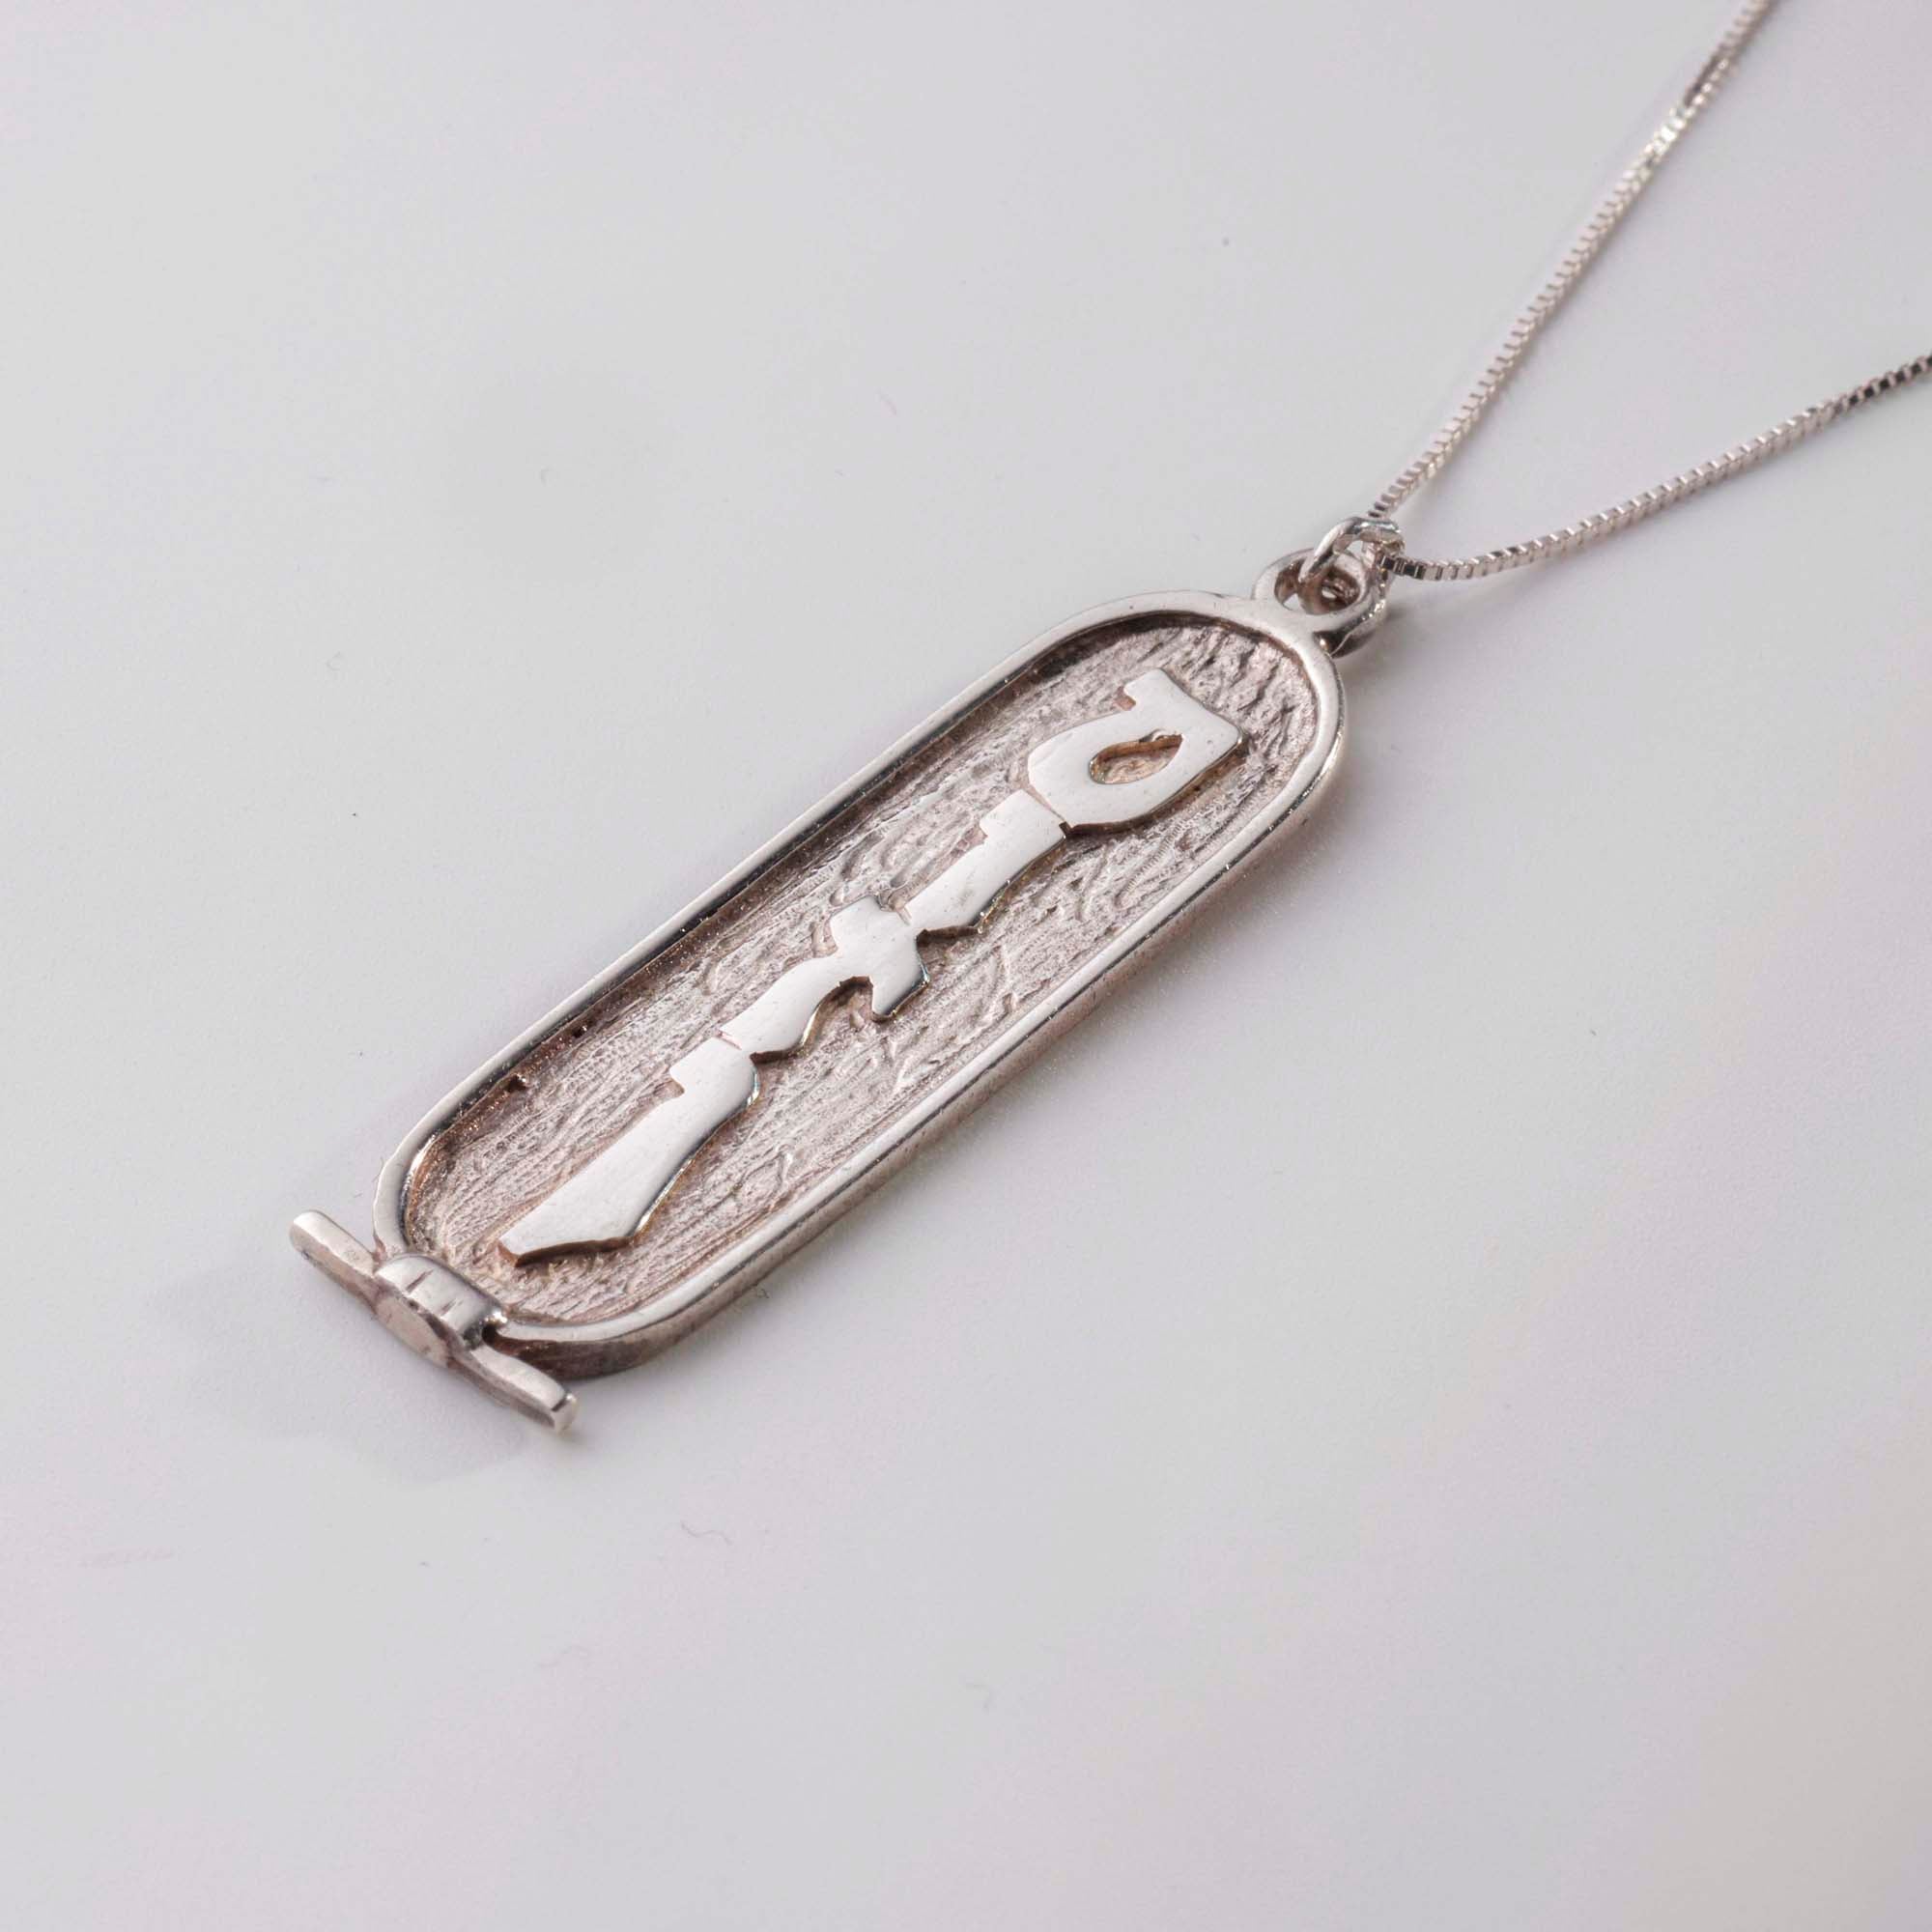 Egyptian Cartouche necklace both sides engravement